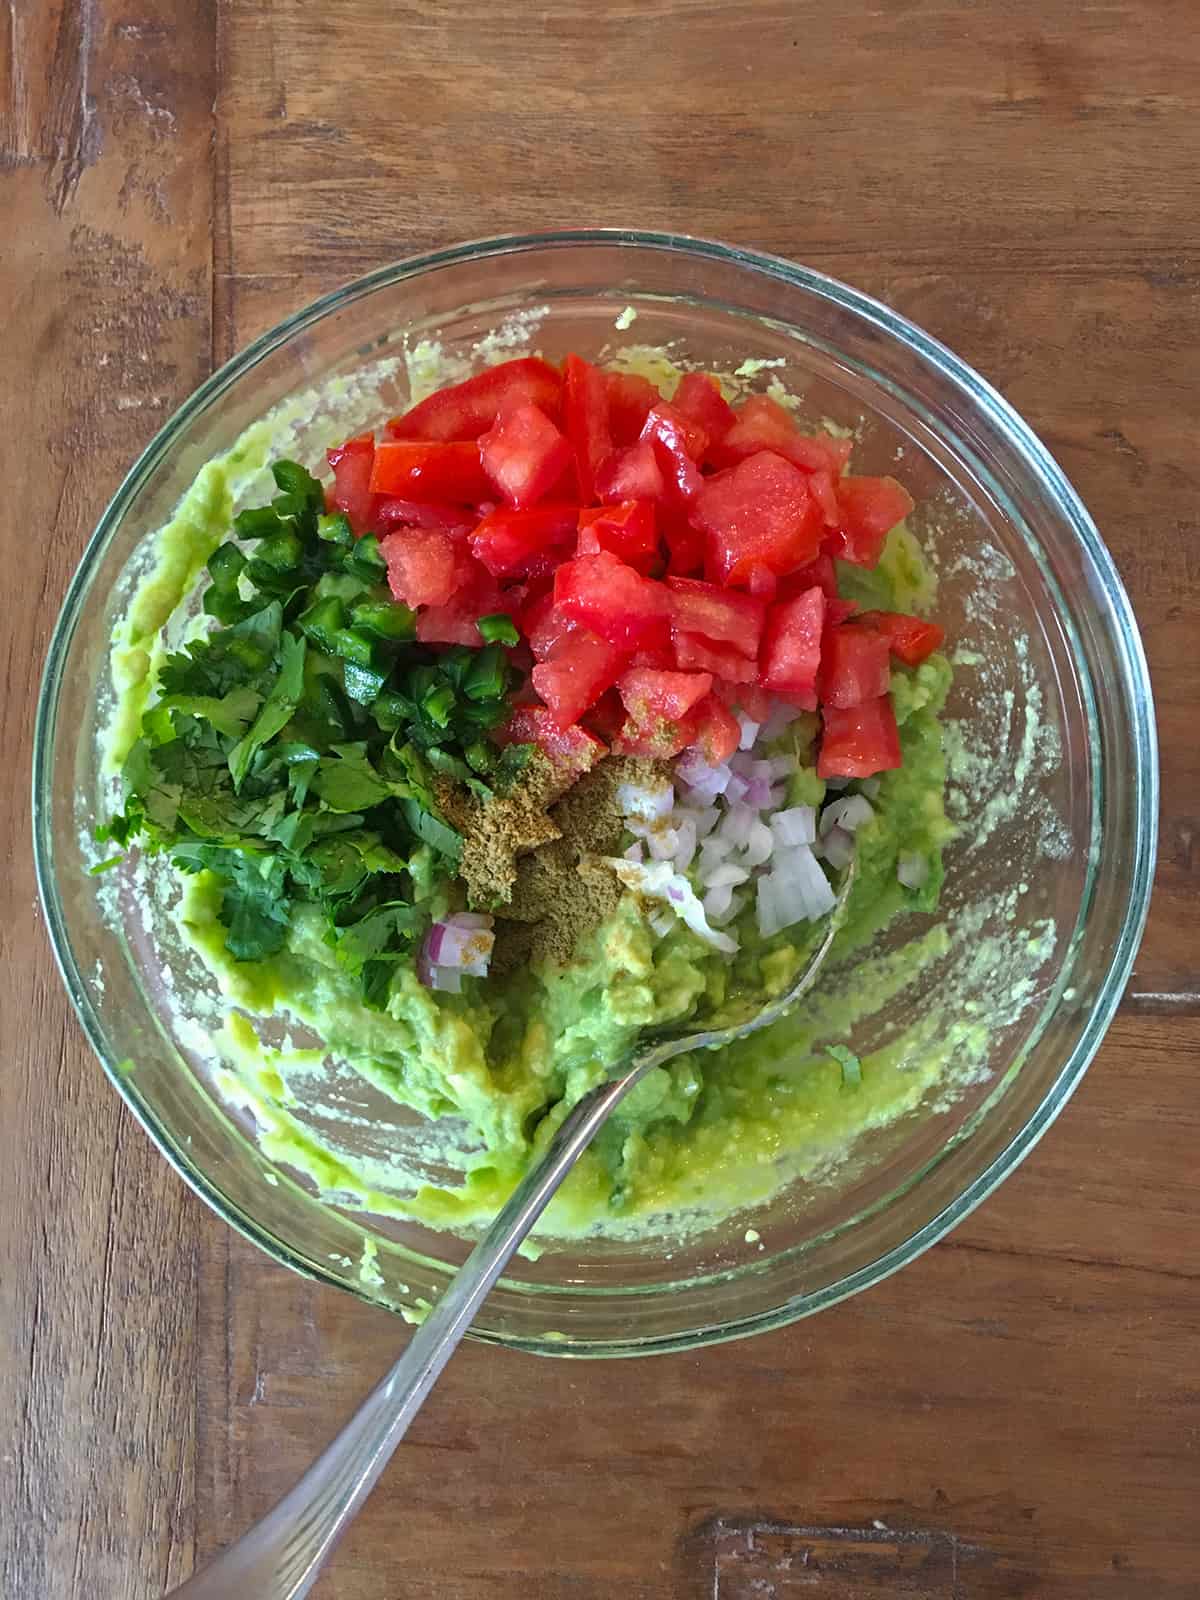 Guacamole ingredients in a glass mixing bowl with a spoon